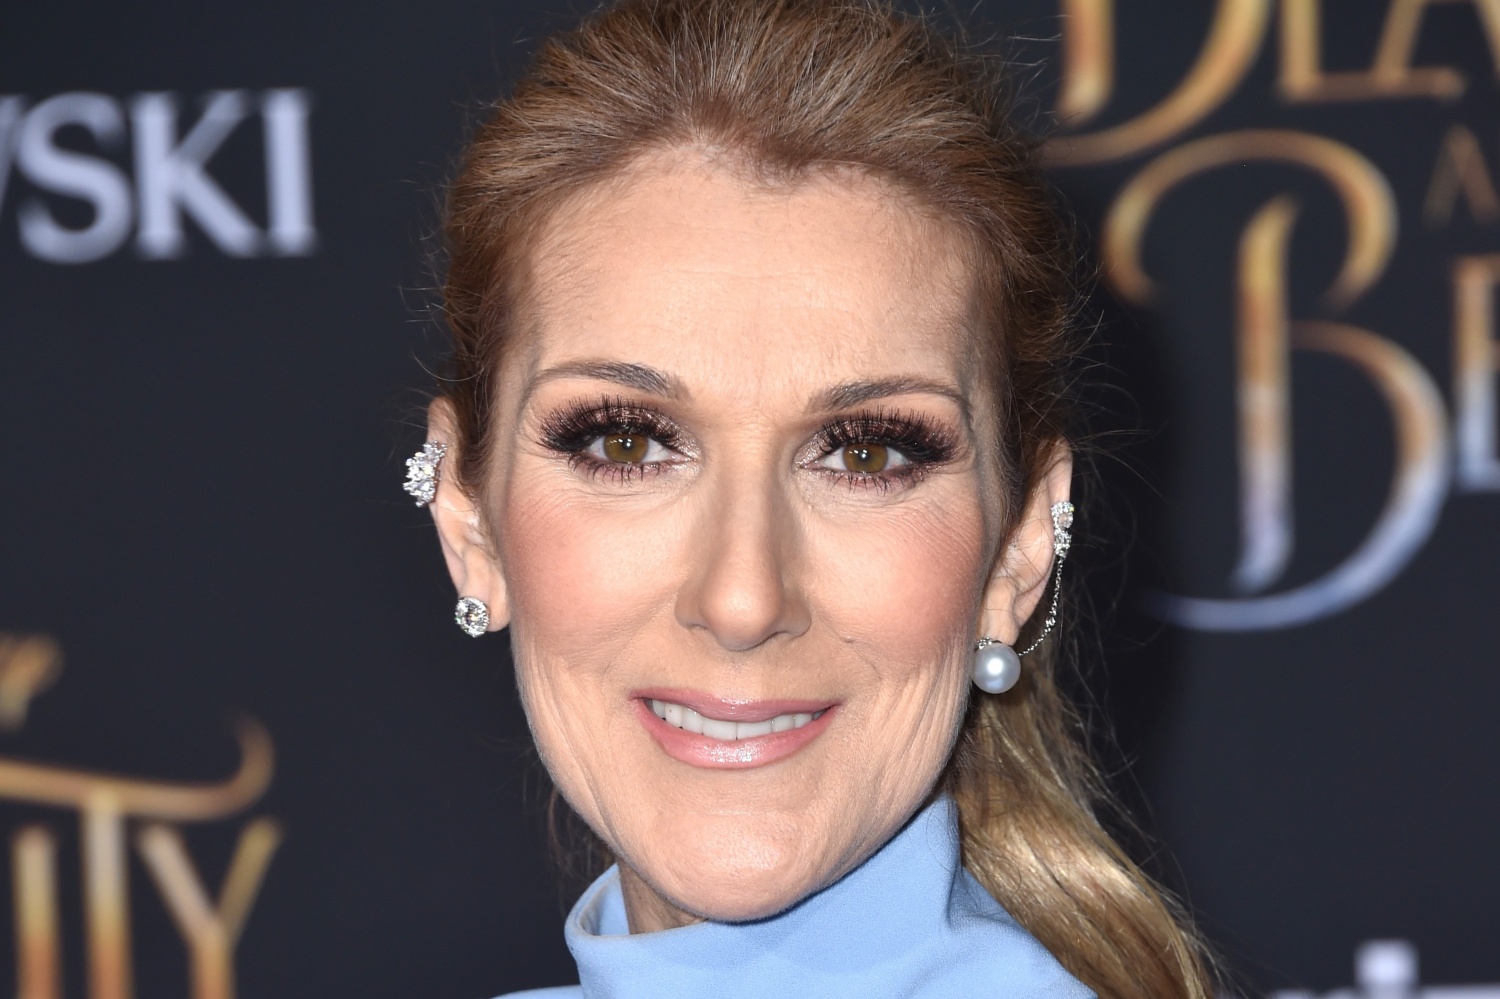 Real Reason Why Celine Dion Canceled Her Tours Amid Health Battle Revealed